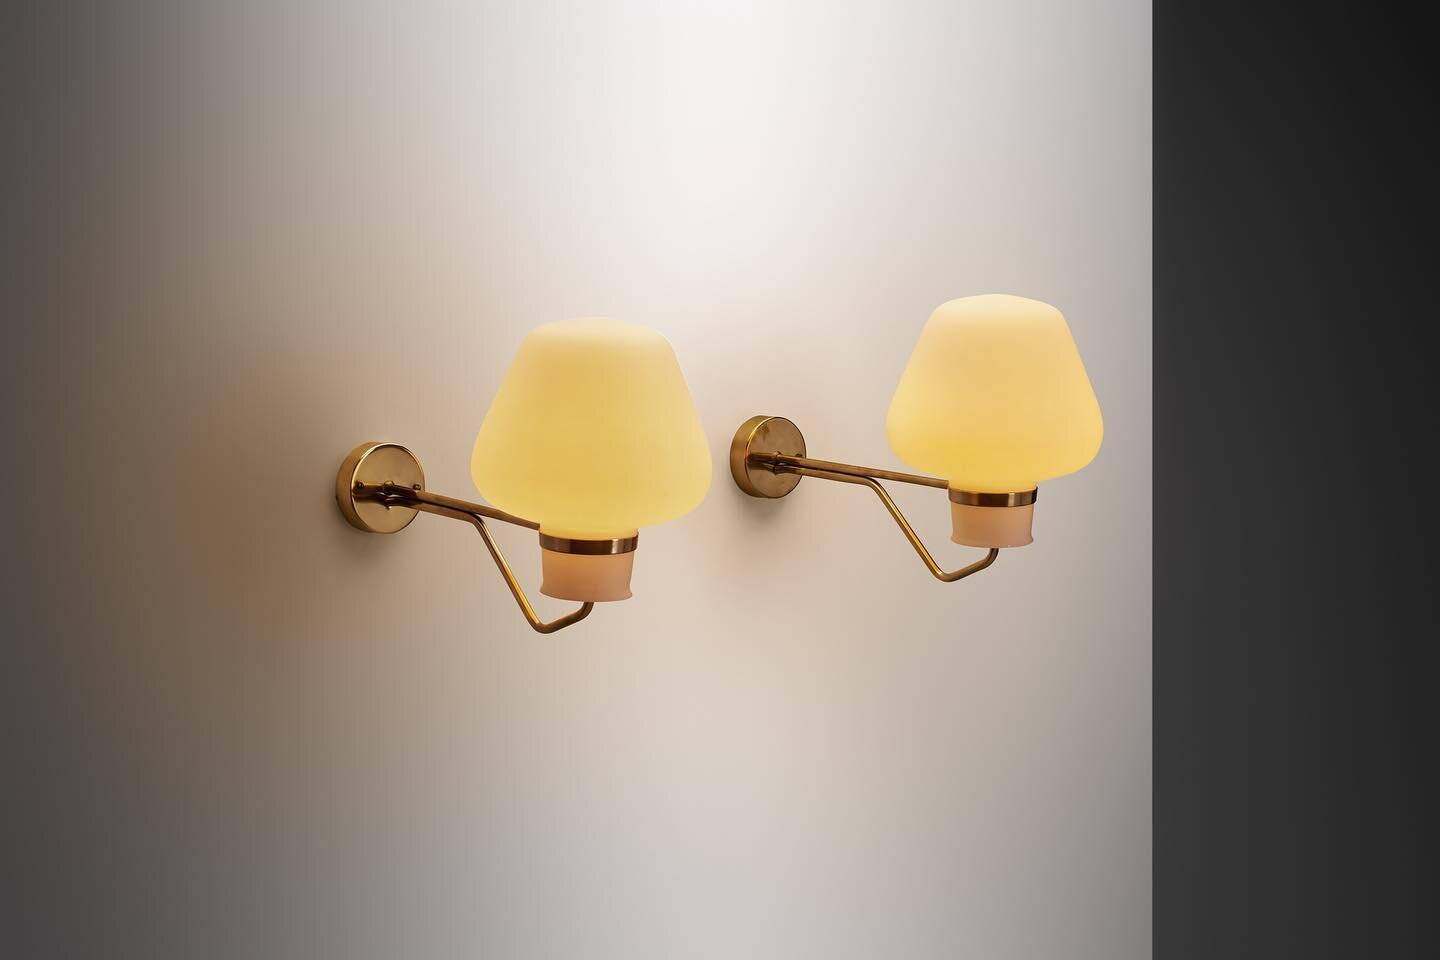 Swedish architect and designer, Erik Gunnar Asplund is celebrated as the godfather of functionalist design in Sweden. Asplund&rsquo;s meticulous attention to detail and penchant for marrying form with function is evident in these wall lamps, combinin